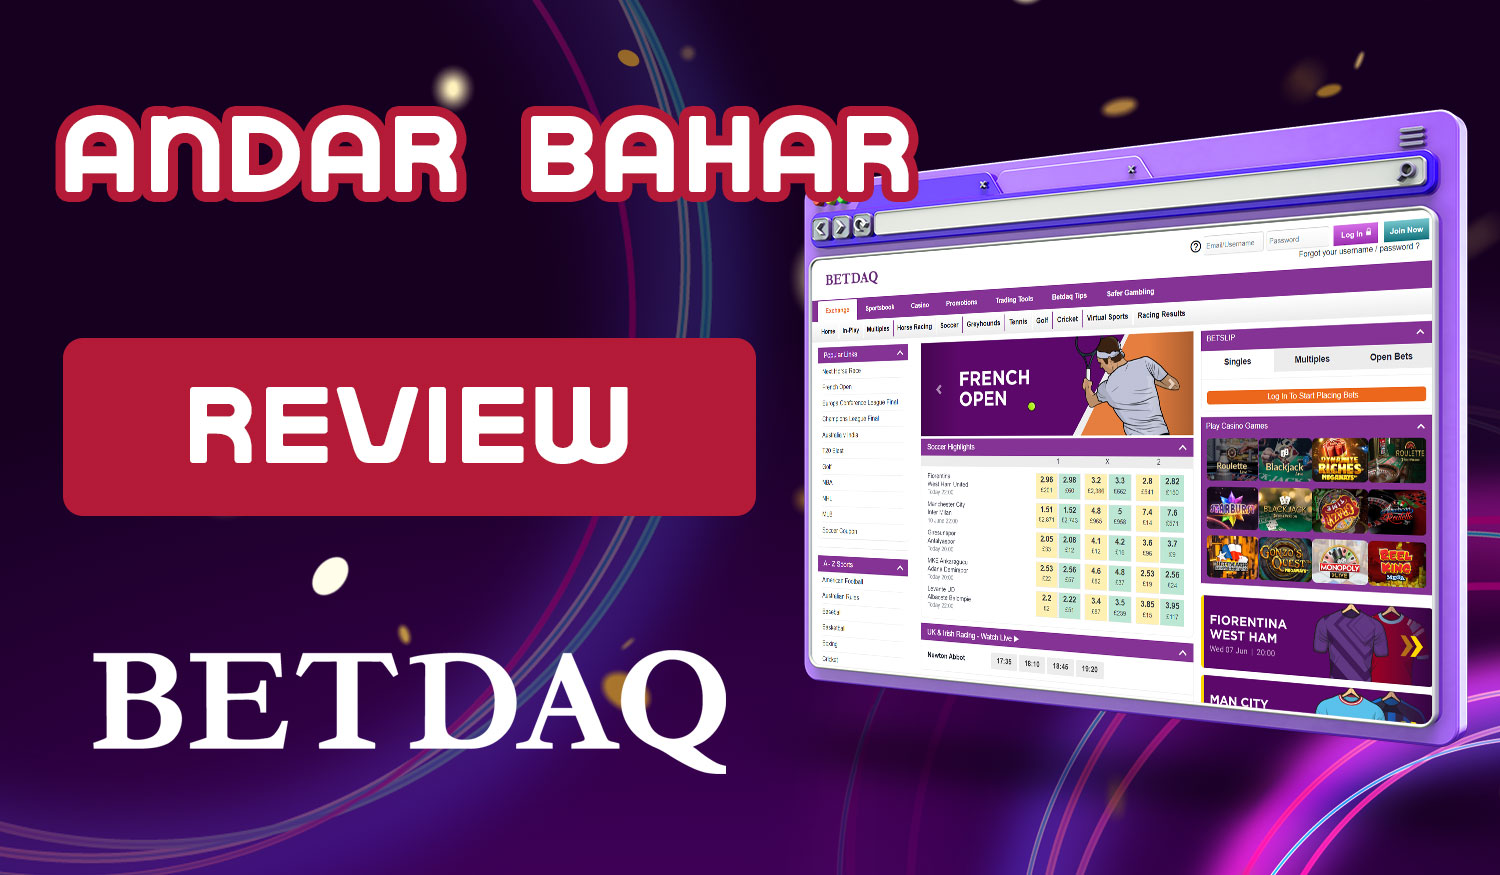 Detailed review of the Betdaq bookmaker on Andar Bahars